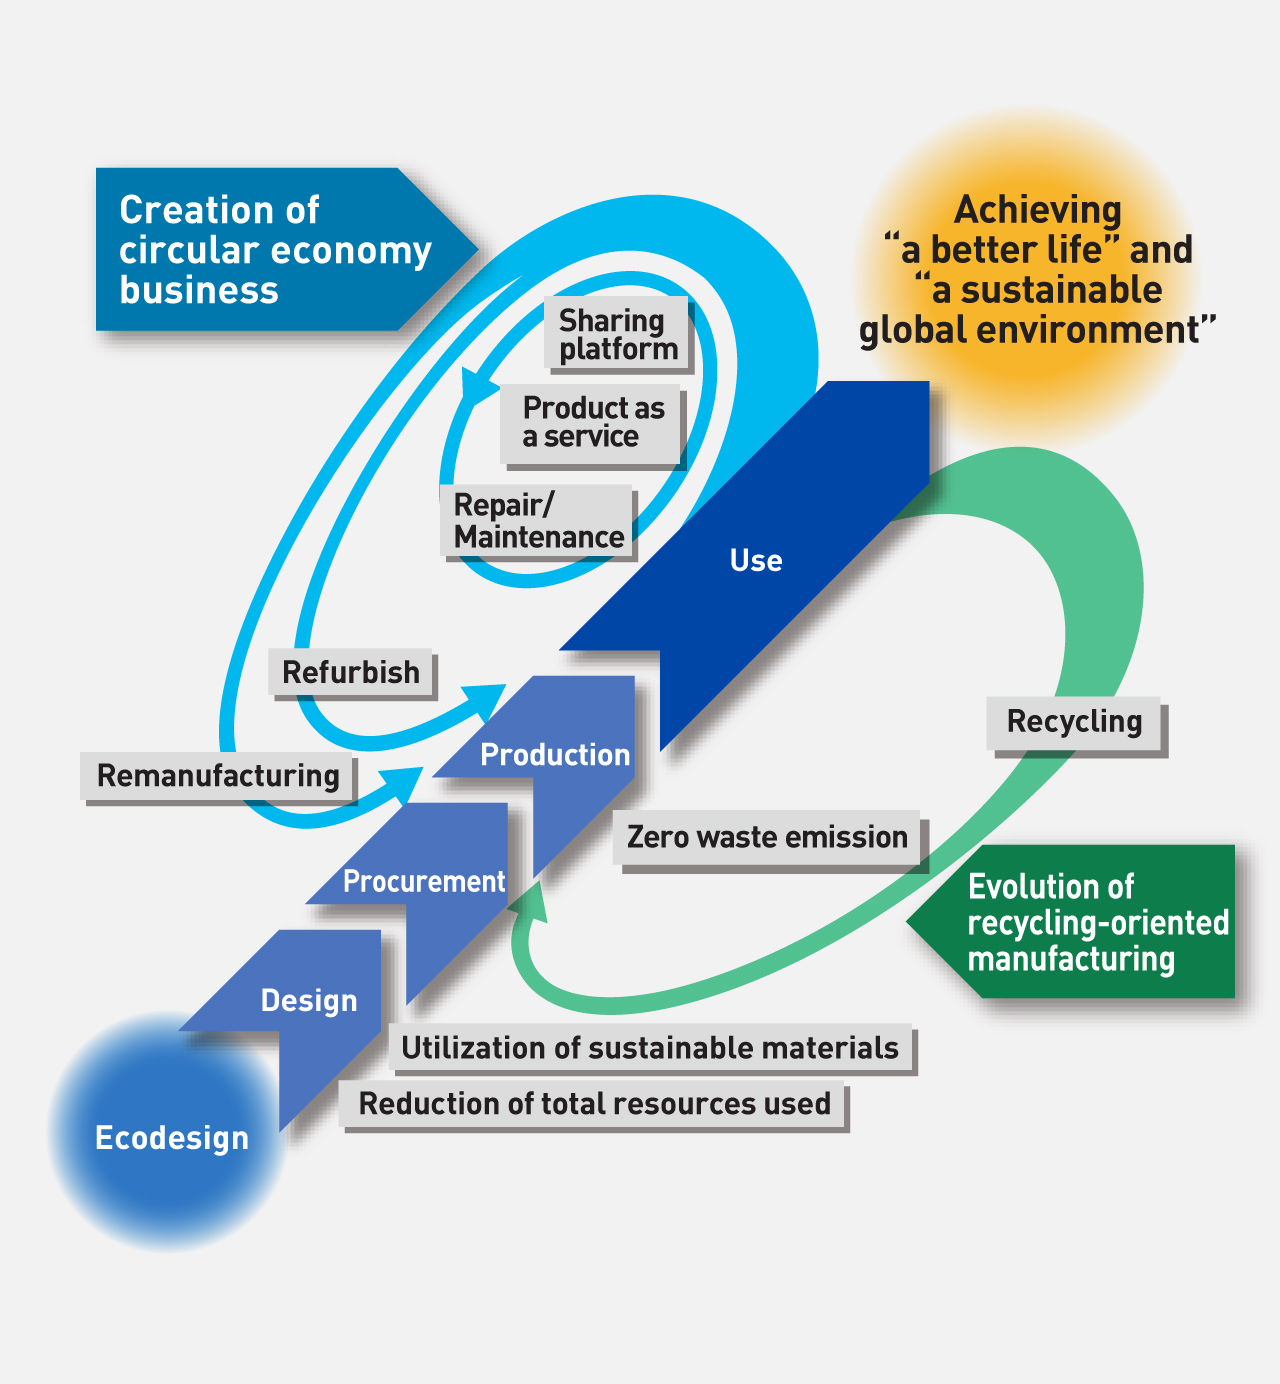 A diagram illustrating the concept of a circular economy initiative, indicating that Panasonic is pursuing resource efficiency and maximizing customer value through two approaches: the evolution of recycling-oriented manufacturing and the creation of circular economy businesses. These activities are categorized into four steps: design, procurement, production, and use, based on the concept of eco-design, and aiming to achieve both a better life and a sustainable global environment. In the evolution of recycling-oriented manufacturing, efforts focus on reducing resources used, utilizing sustainable resources, achieving zero waste emissions, and recycling. In the creation of circular economy businesses, efforts focus on remanufacturing, refurbishing, repair/maintenance, product-as-a-service, and sharing platforms.